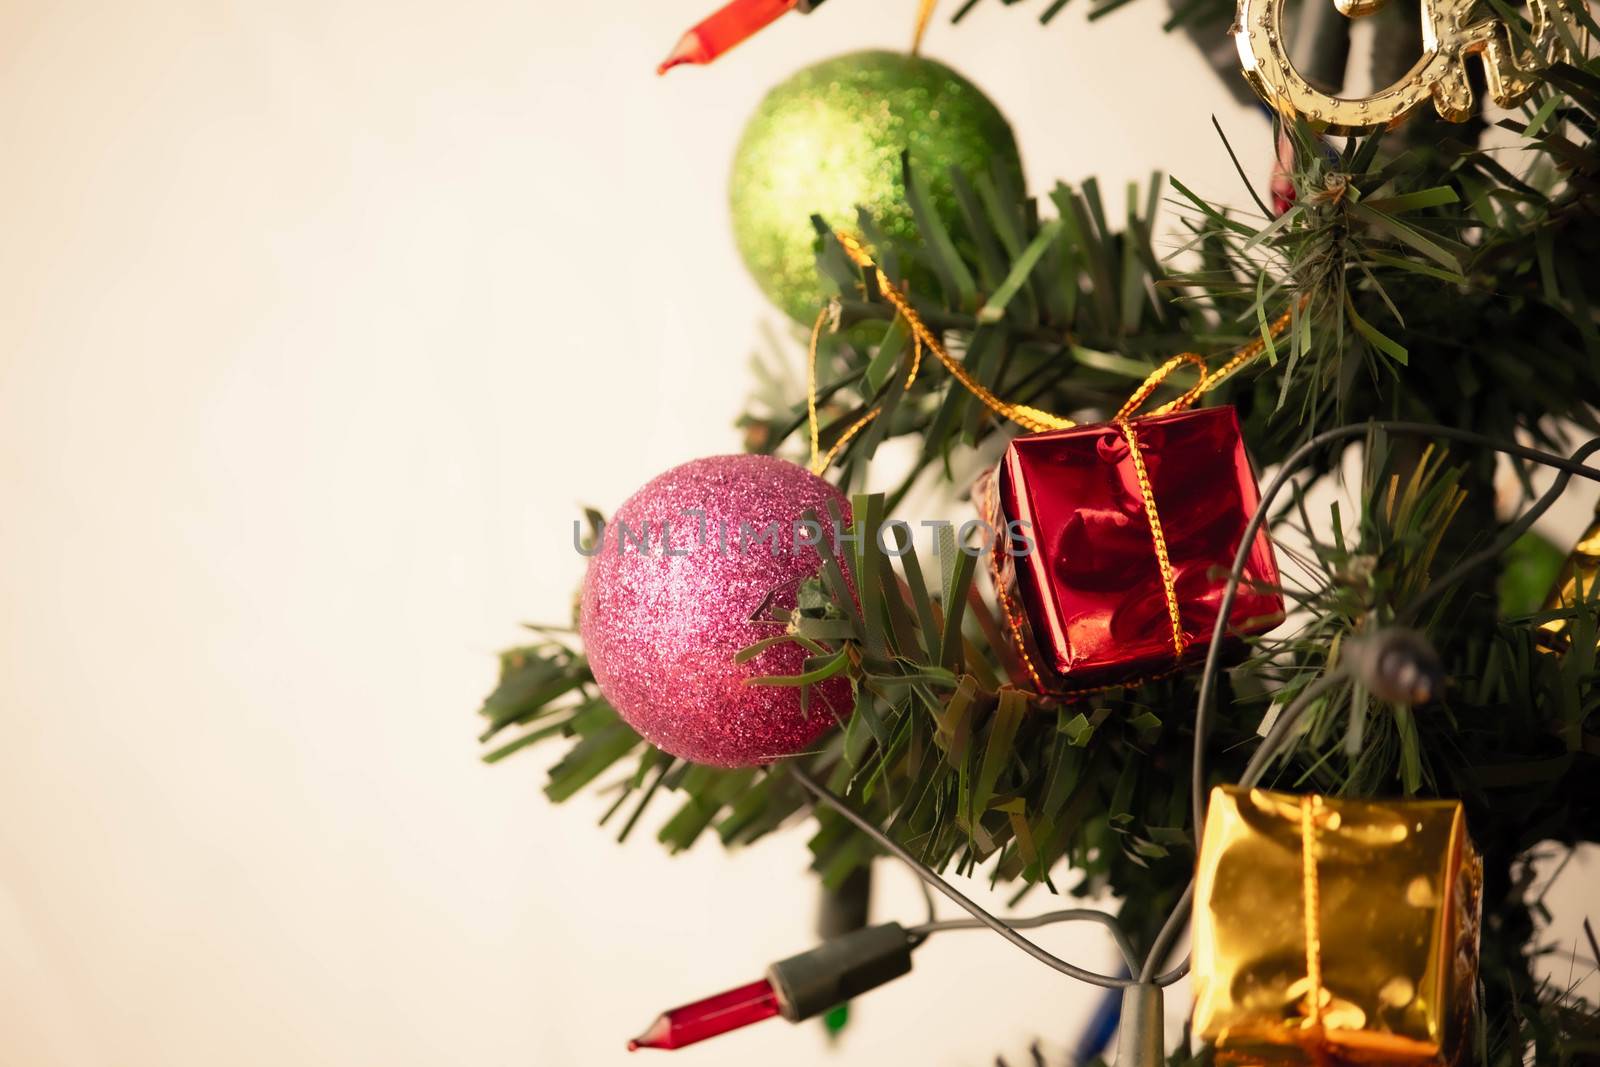 Close up of pink bauble hanging from a decorated Christmas tree with lights presents for new year isolated on white background.